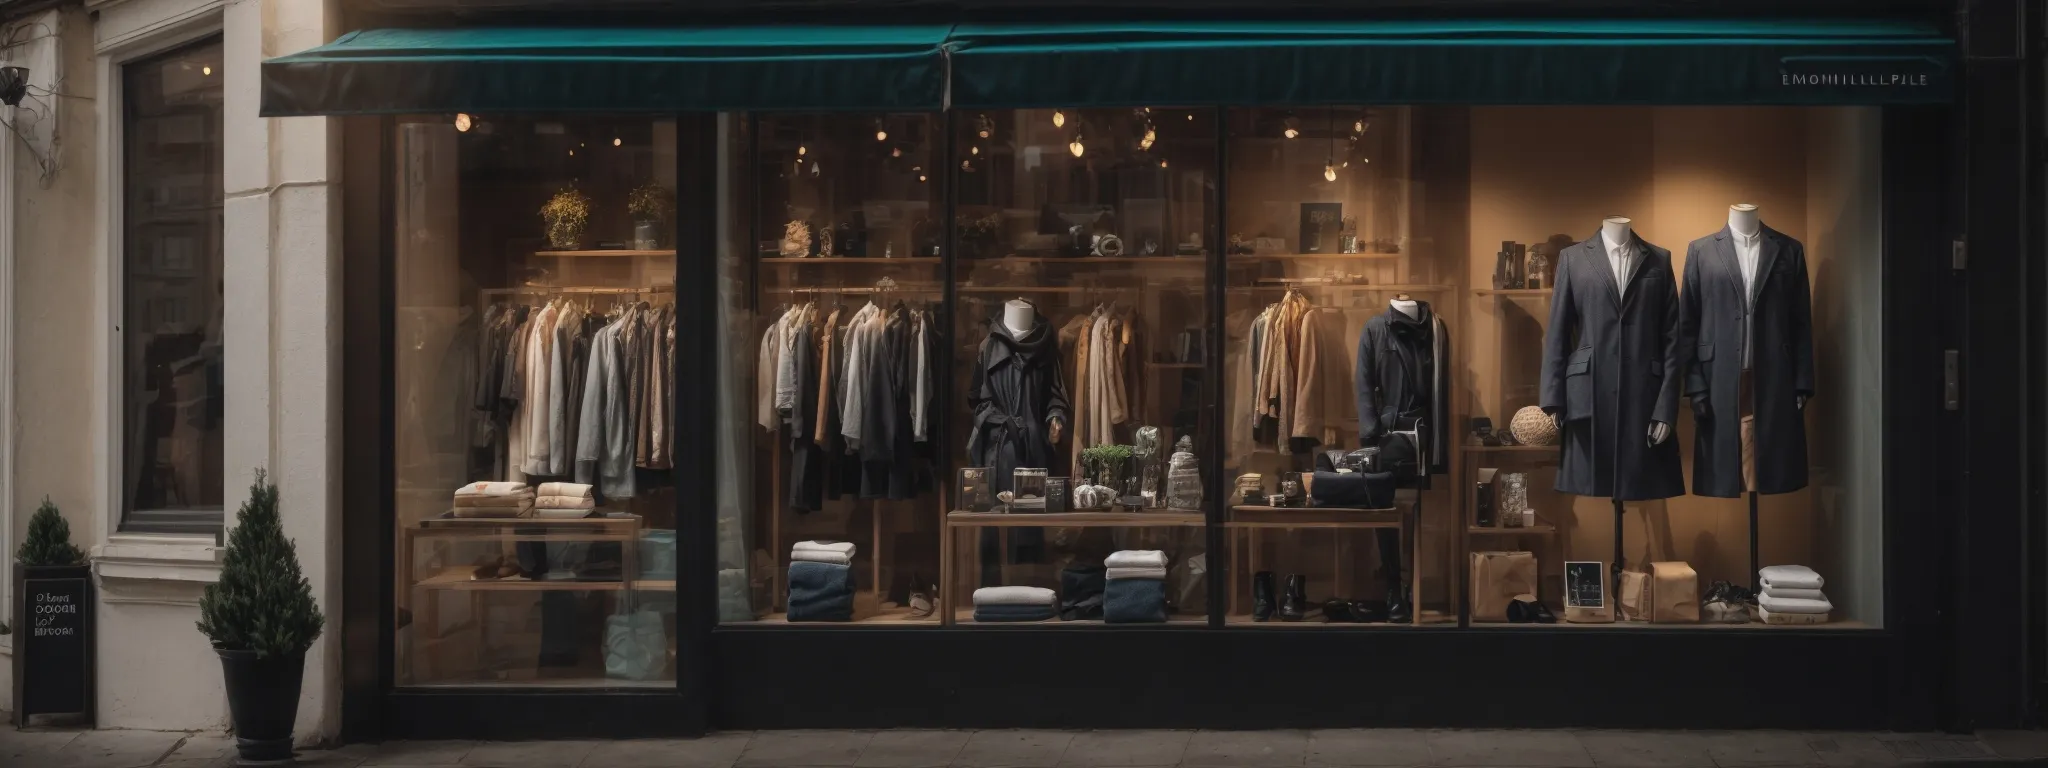 a bright storefront with a prominent display window showcasing the latest products, embodying the potential for digital growth through seo optimization.